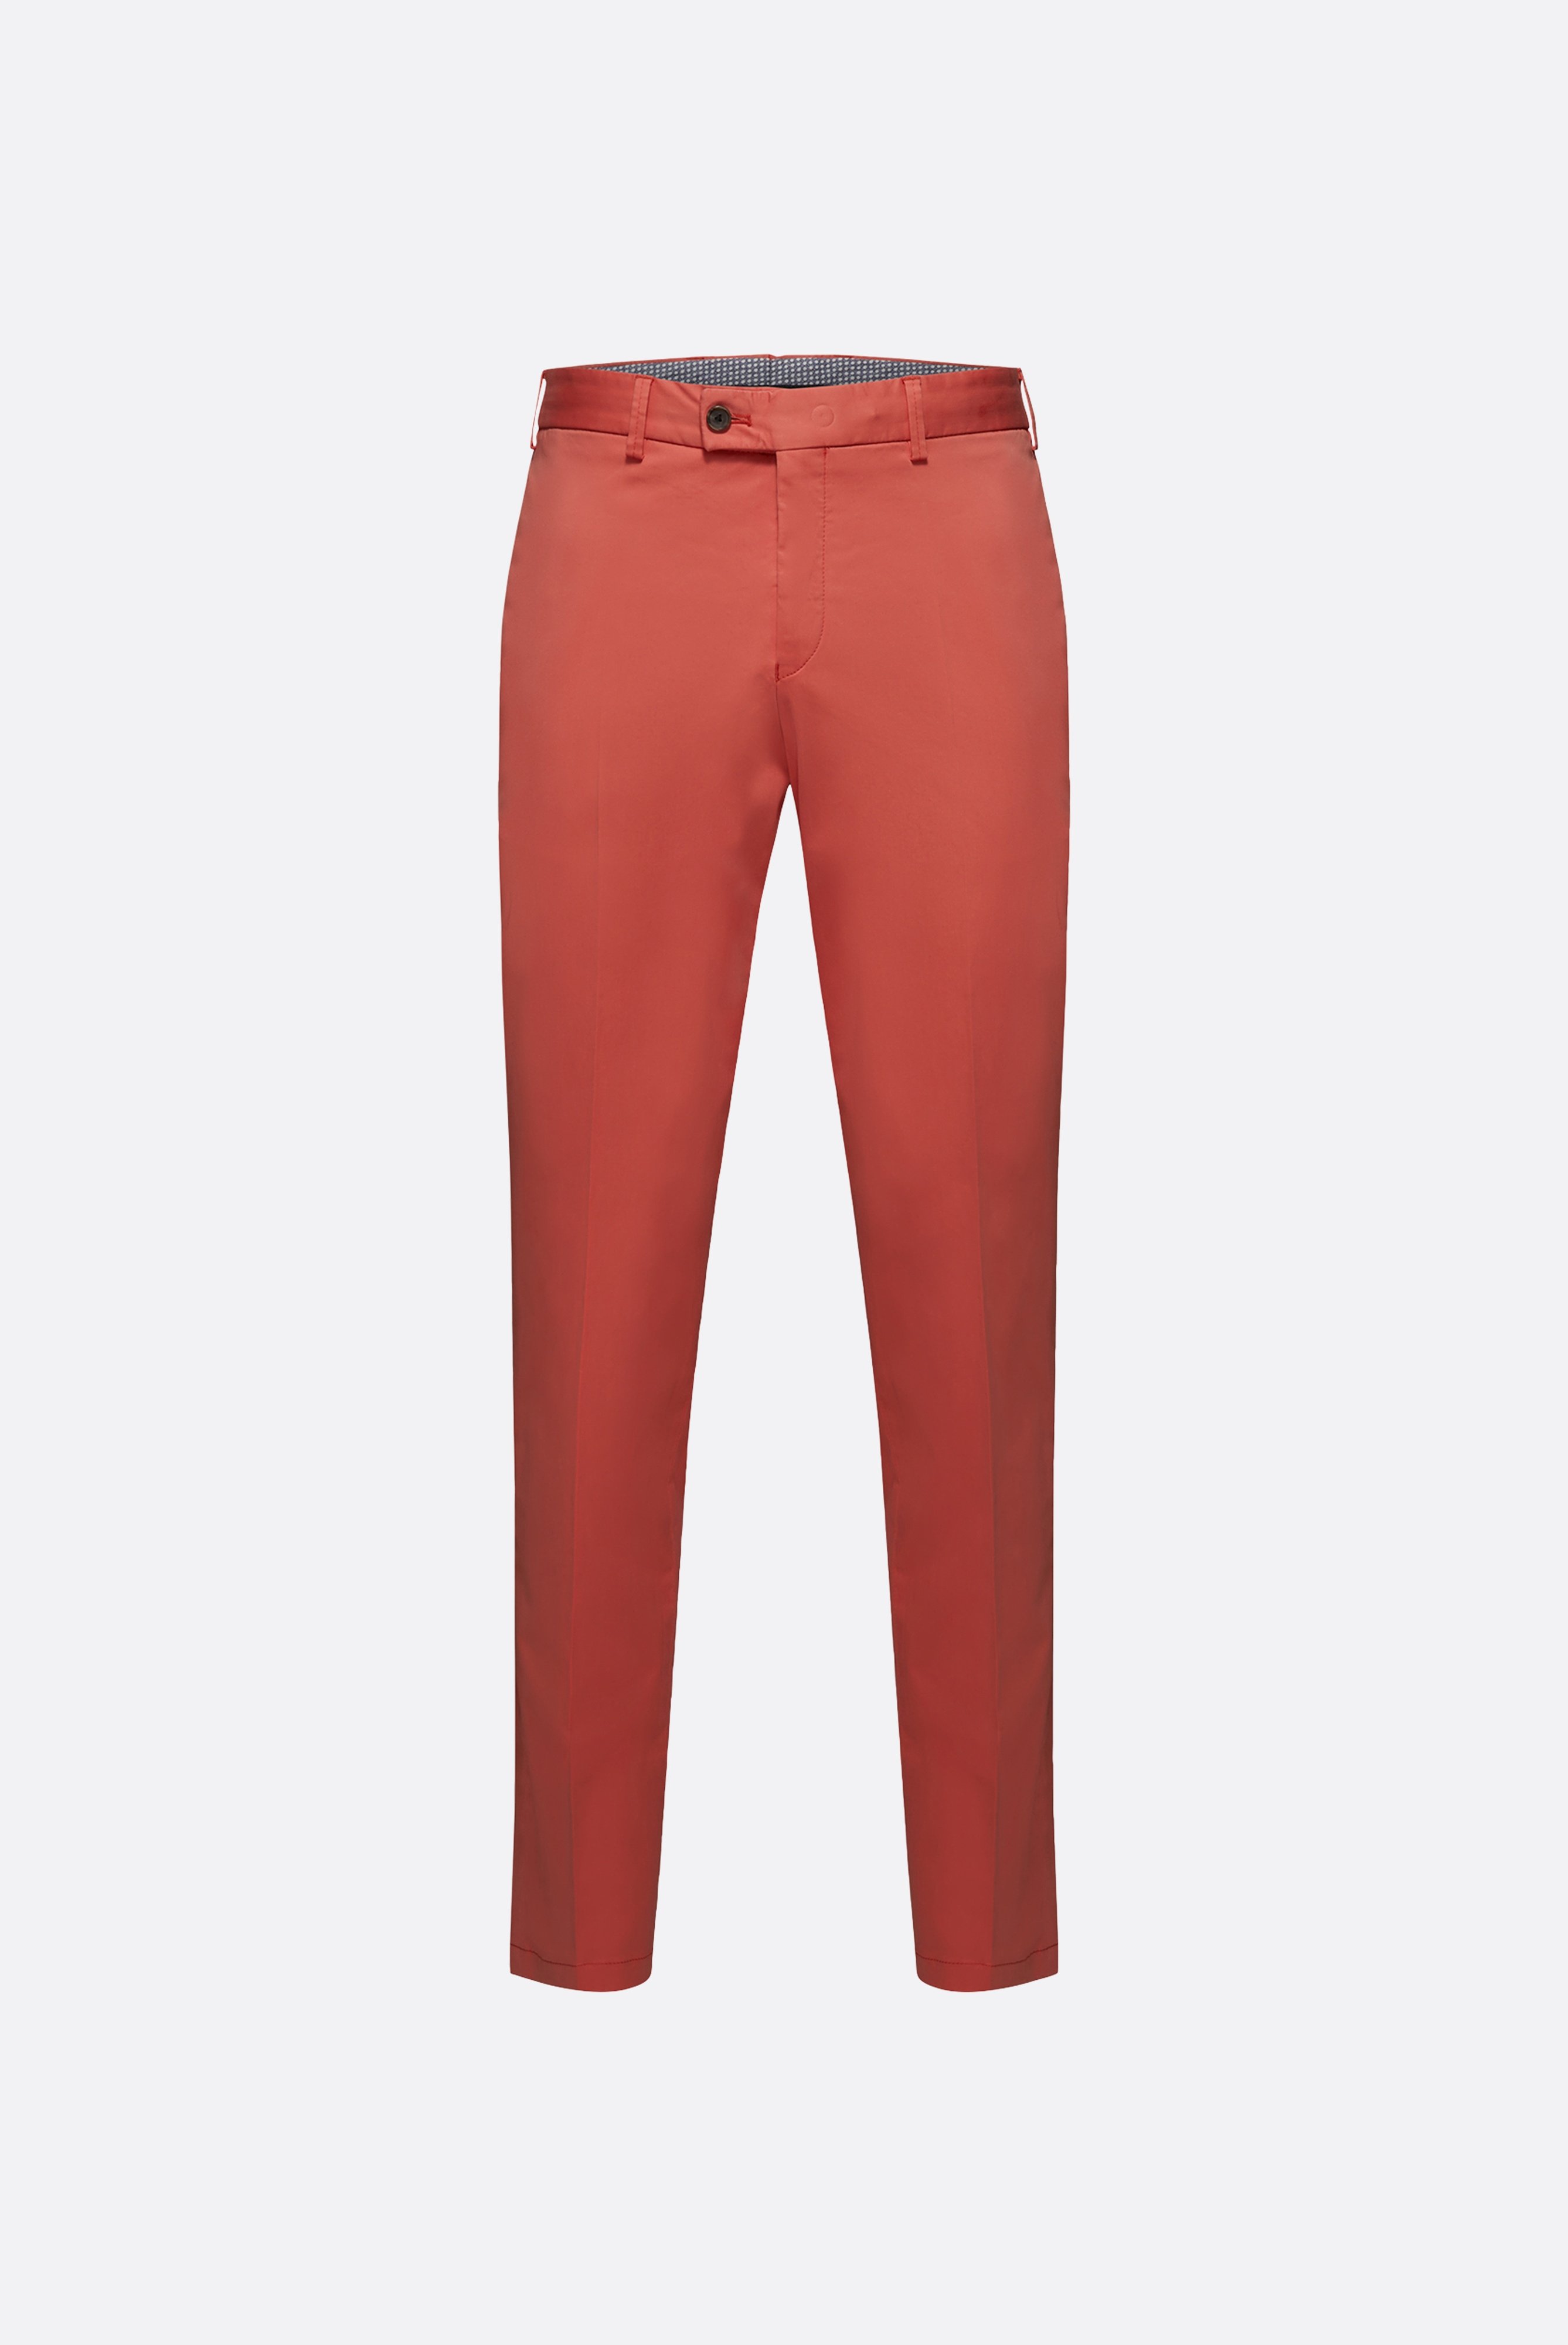 Jeans & Trousers+Cotton with Stretch Tapered Chinos+80.7858..J00151.440.54